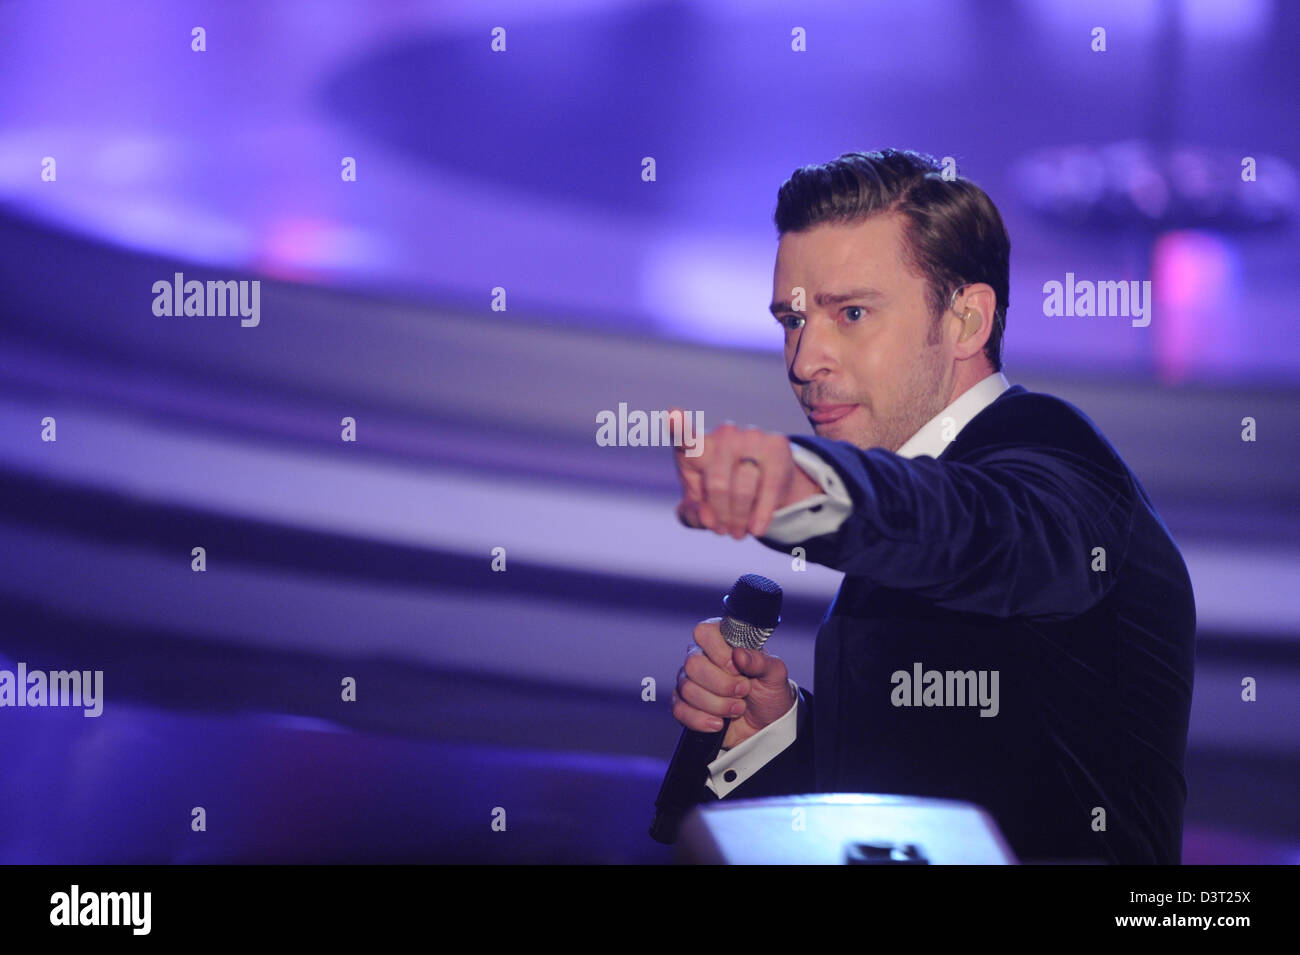 Friedrichshafen, Germany. 23rd Feb, 2013. US music star Justin Timberlake performs during the German television show 'Wetten, dass..?', or 'Bet that ...', in Friedrichshafen, Germany, 23 February 2013. Photo: Felix Kaestle/dpa/Alamy Live News Stock Photo